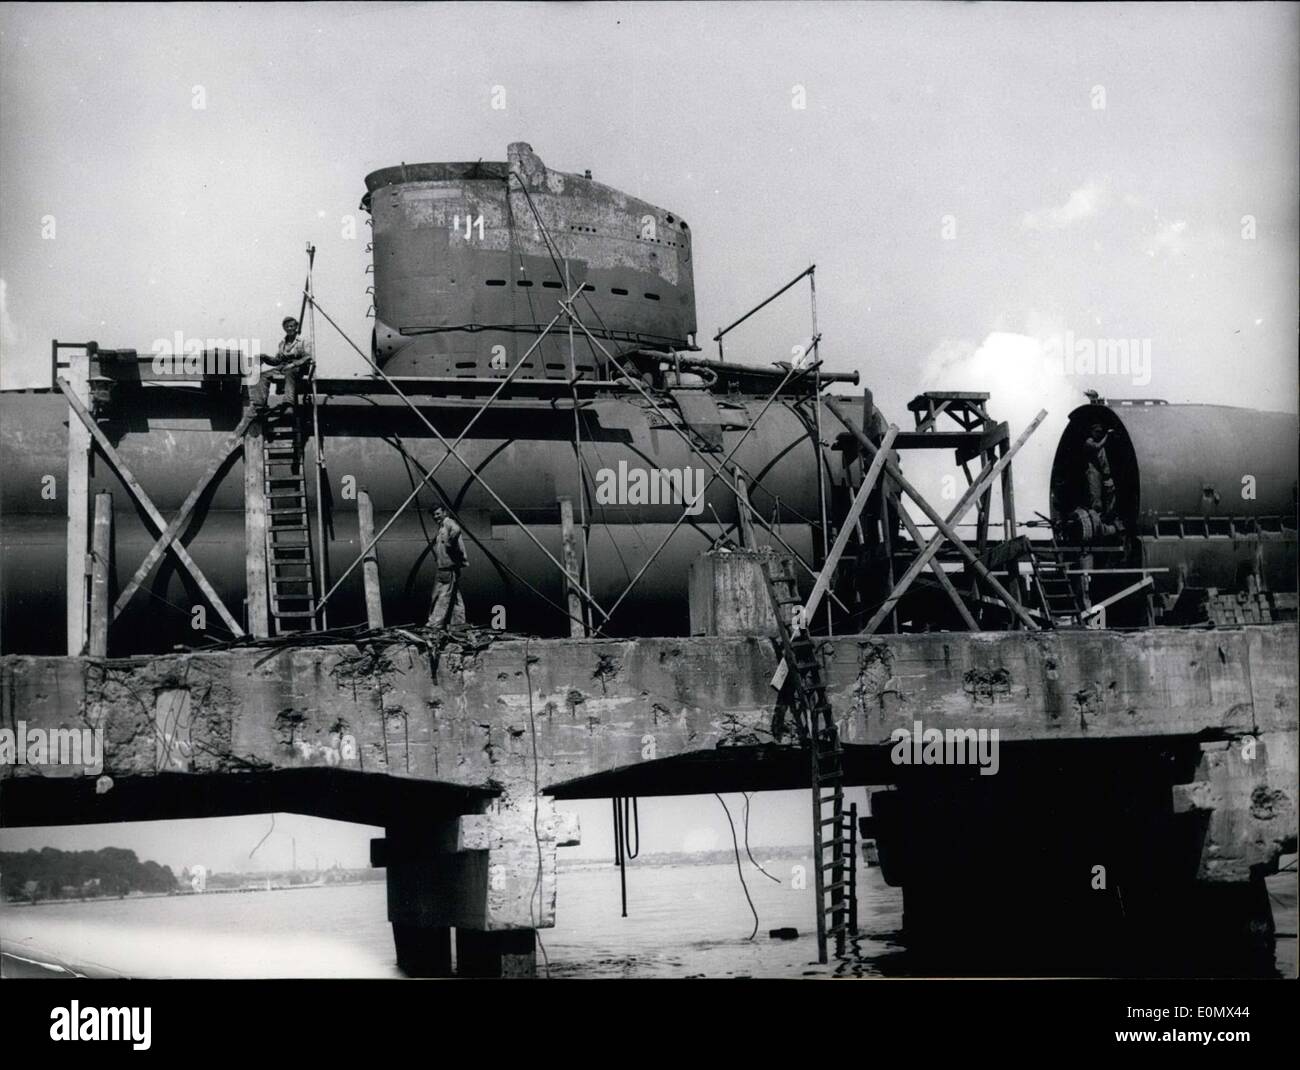 Jul. 22, 1956 - The two first German U-Boats of the new German navy are currently being restored at Howaldtswerken. The U-Boats, sank in the last days of the war, were salvaged from the East Sea by a Hamburg firm. After extensive examinations by experts the Federal Defense Ministry decided to take over the two boats, paying 800,000DM to do so. After repairs they will be used as instructional boats. Pictured: The first salvaged boat ''U 2365,'' cut apart in order to repair it. Stock Photo